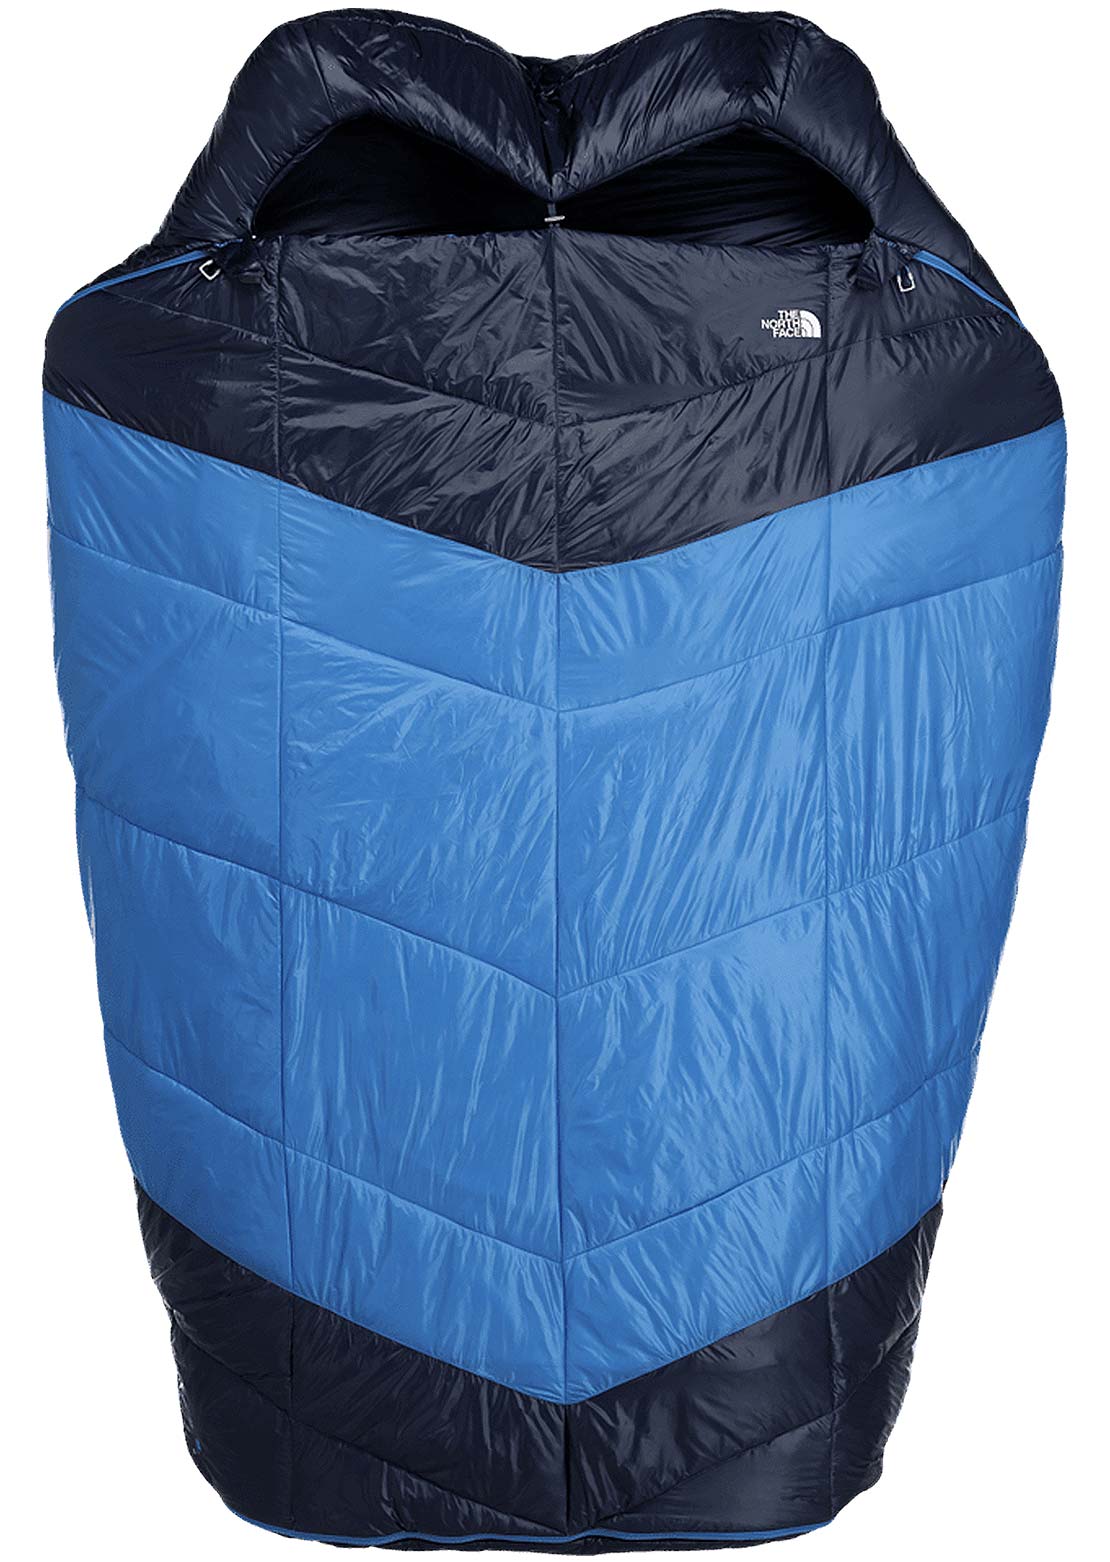 The North Face One Bag Duo Sleeping Bag Super Sonic Blue/Arrowwood Yellow